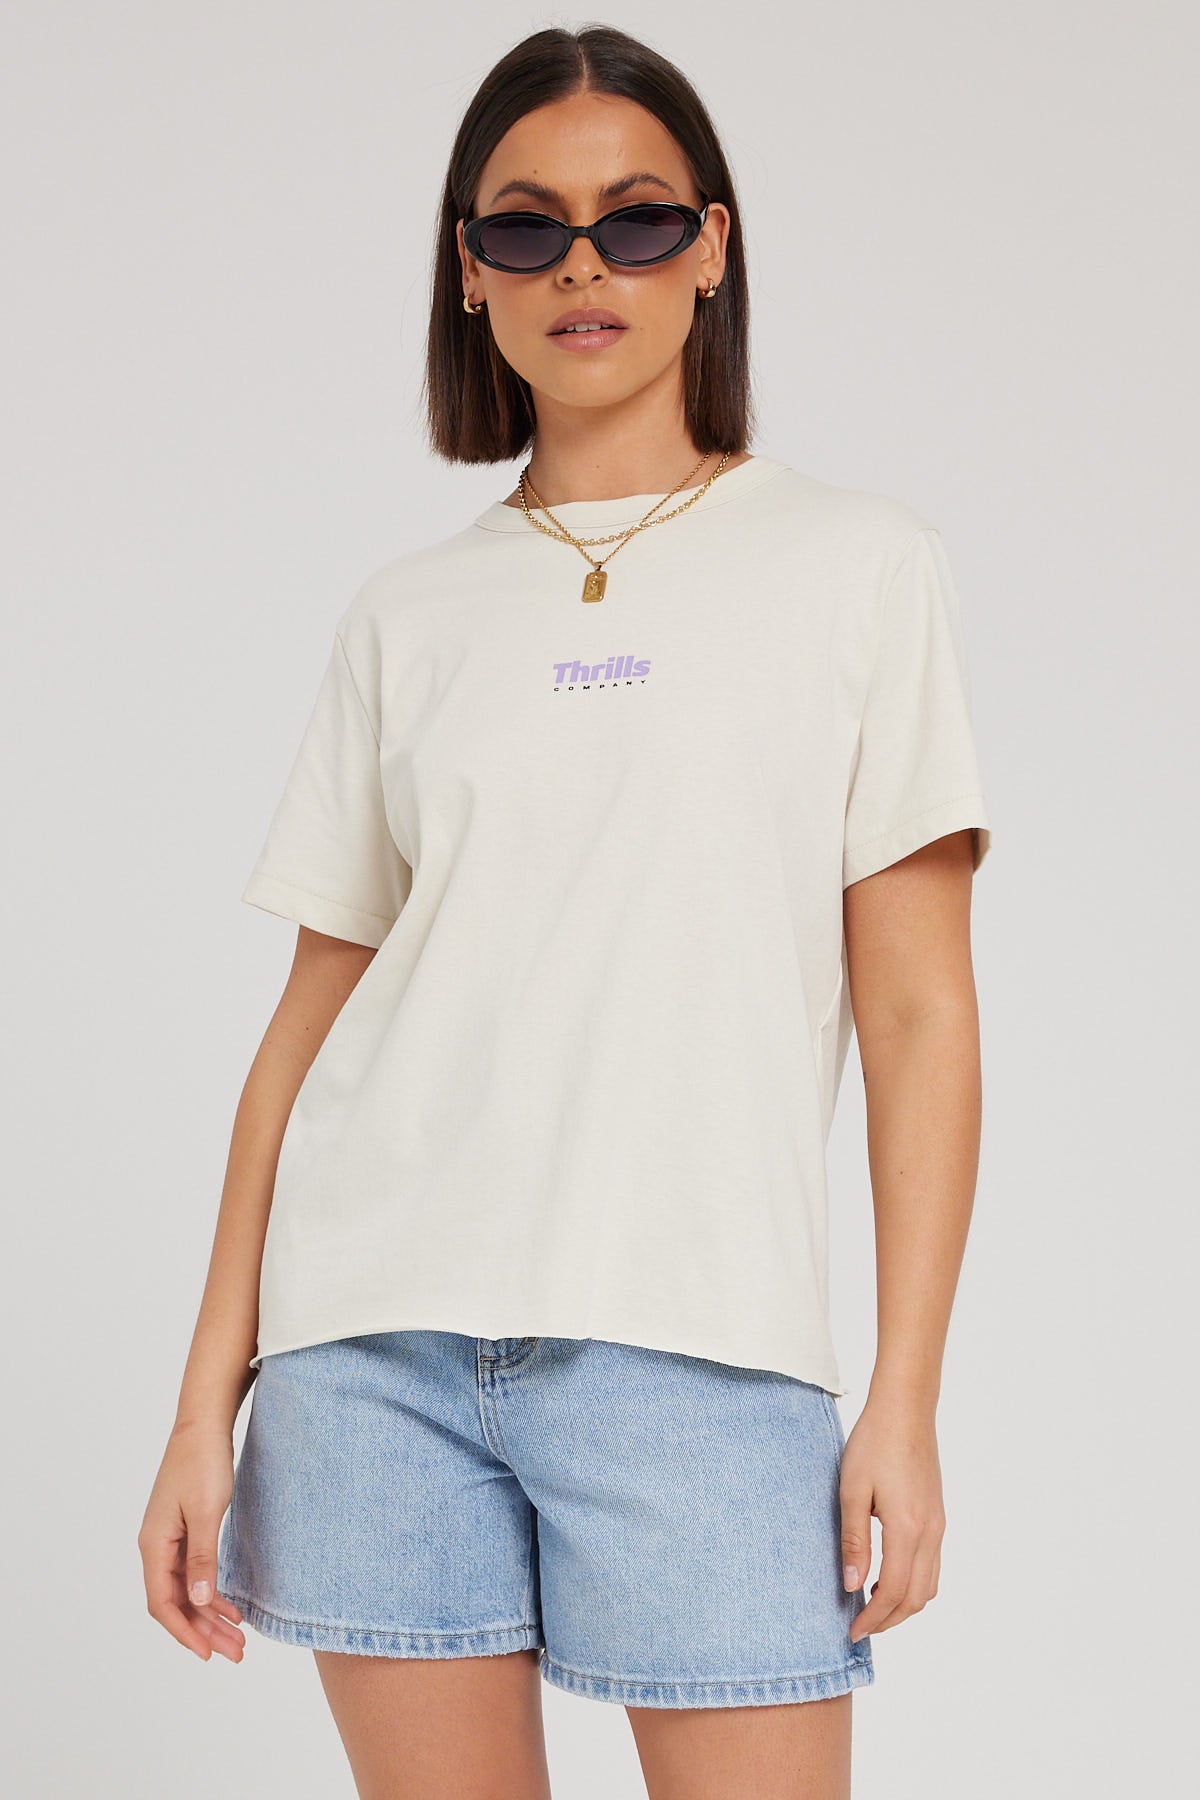 Thrills Paradox Relaxed Fit Tee Heritage White